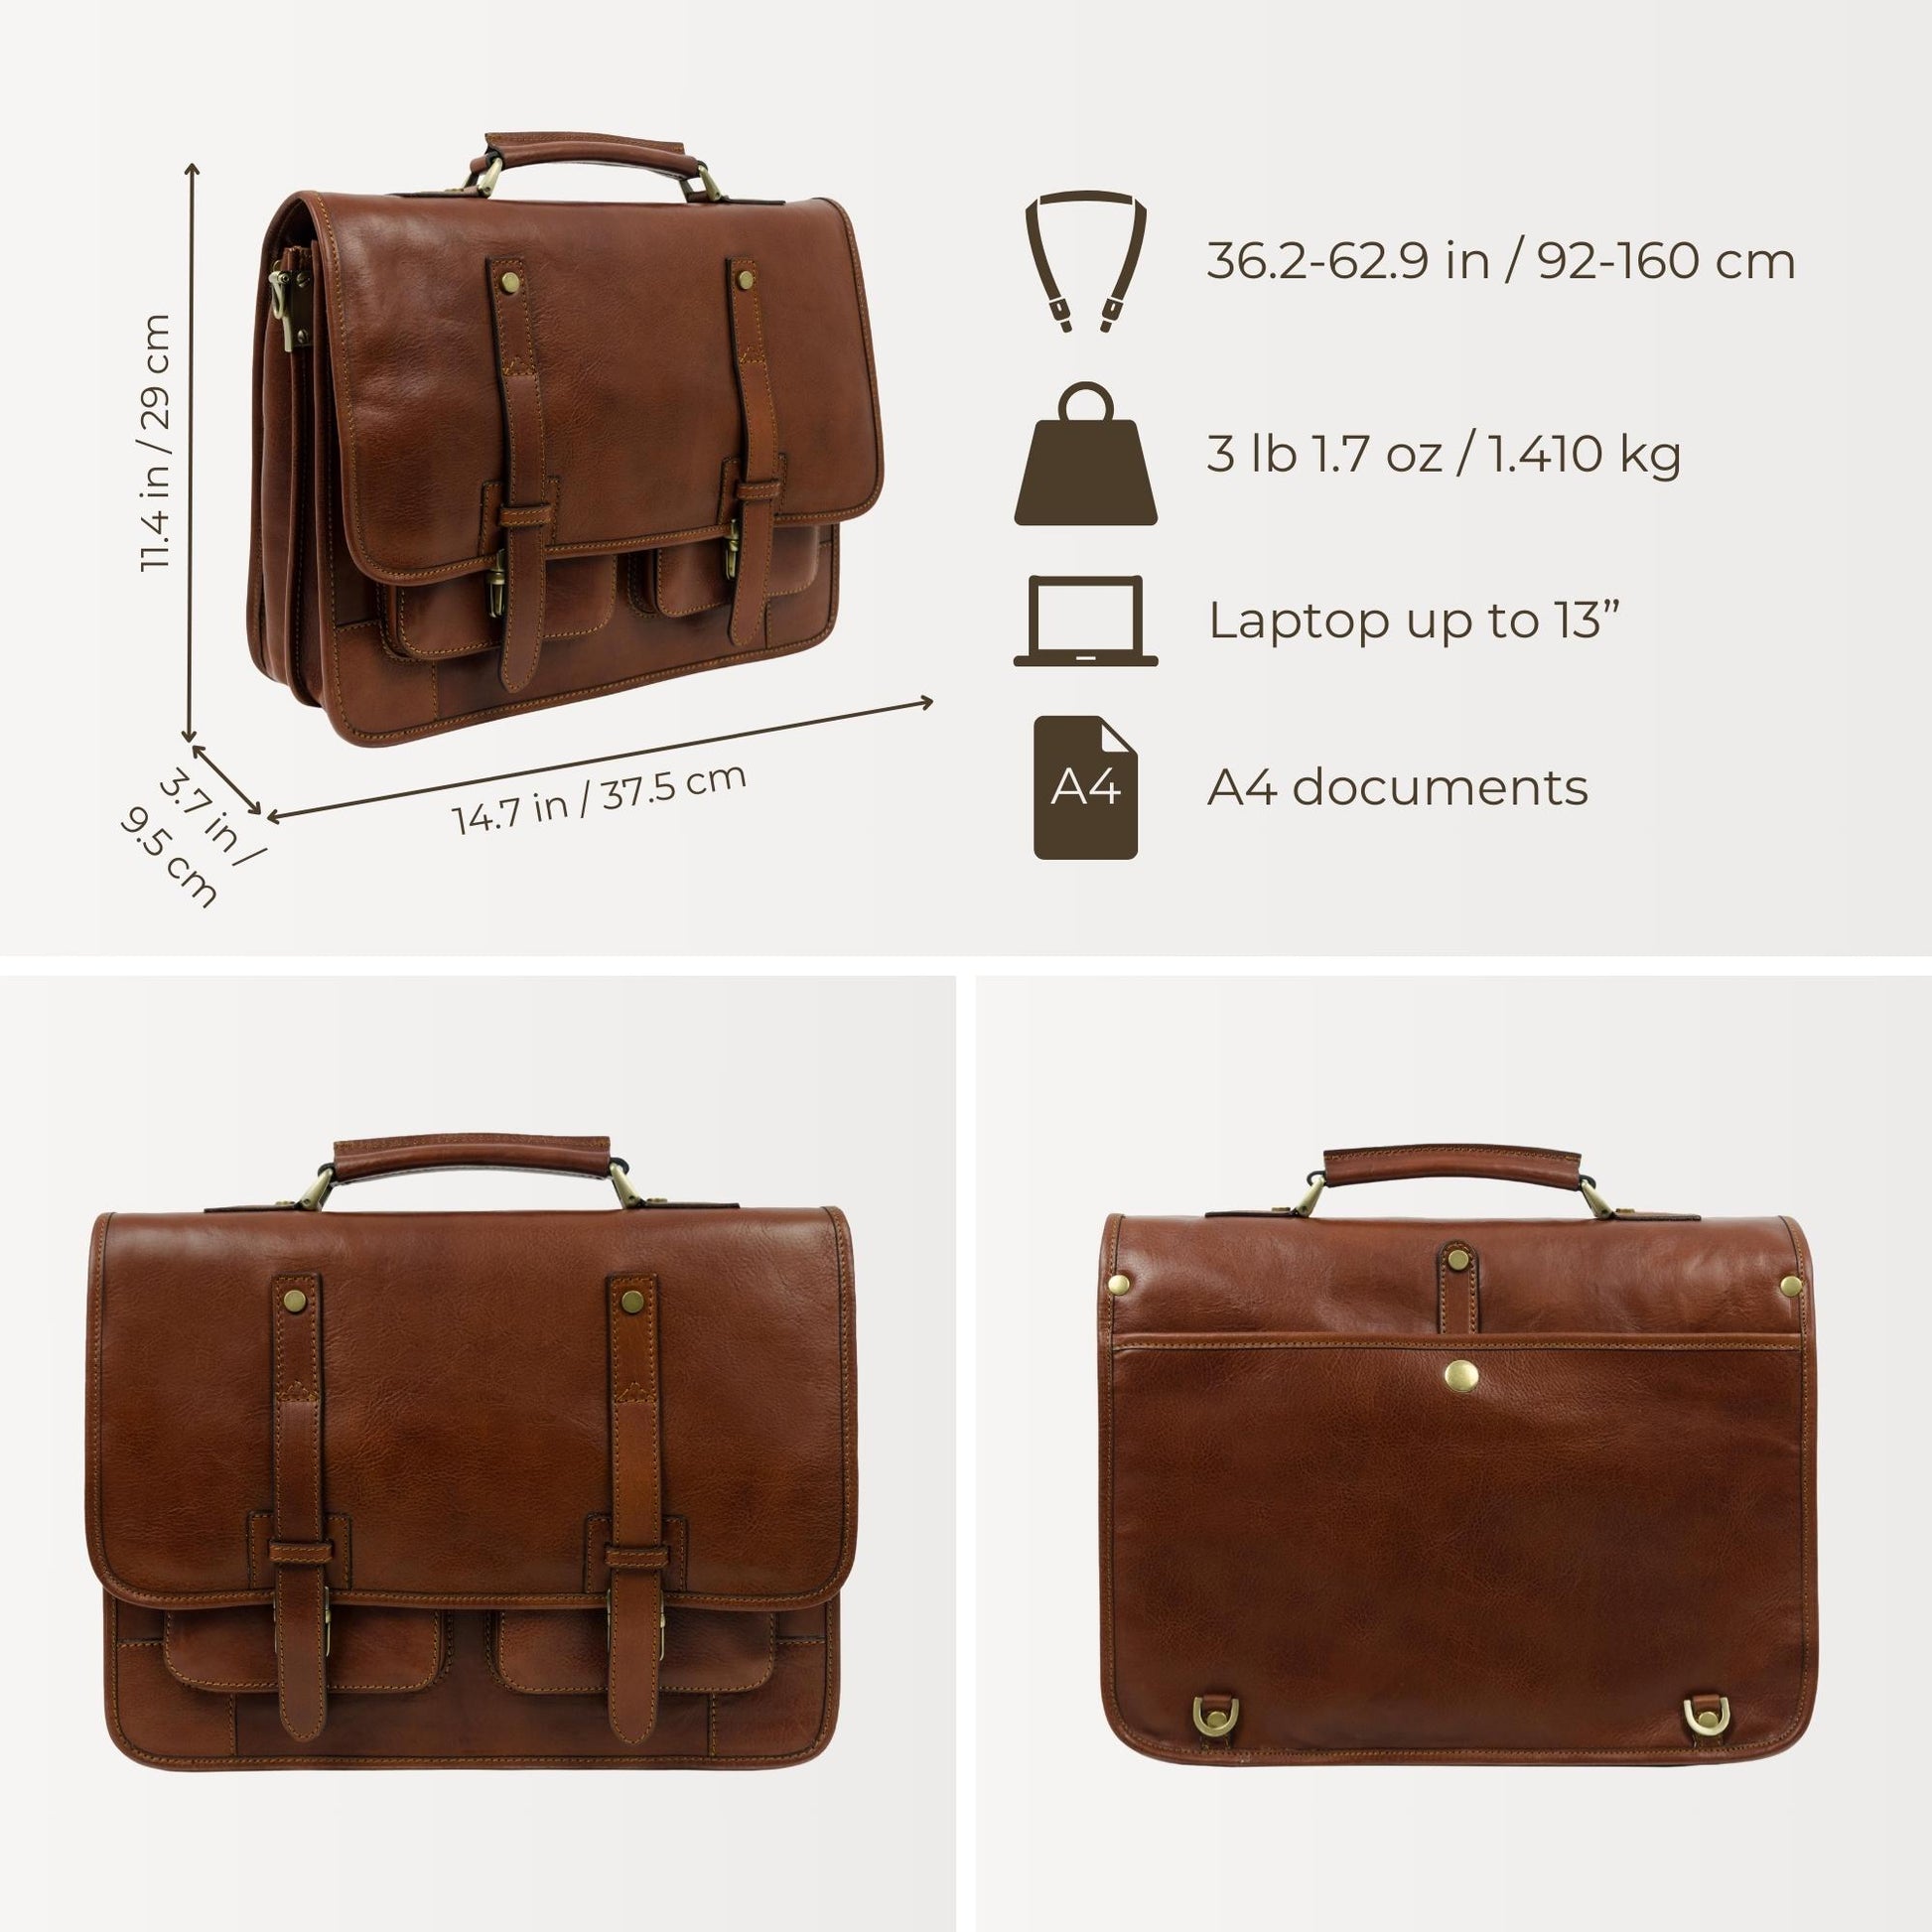 Cognac Brown Matte Leather Briefcase Backpack - A Midsummer Night's Dream Briefcase Time Resistance   